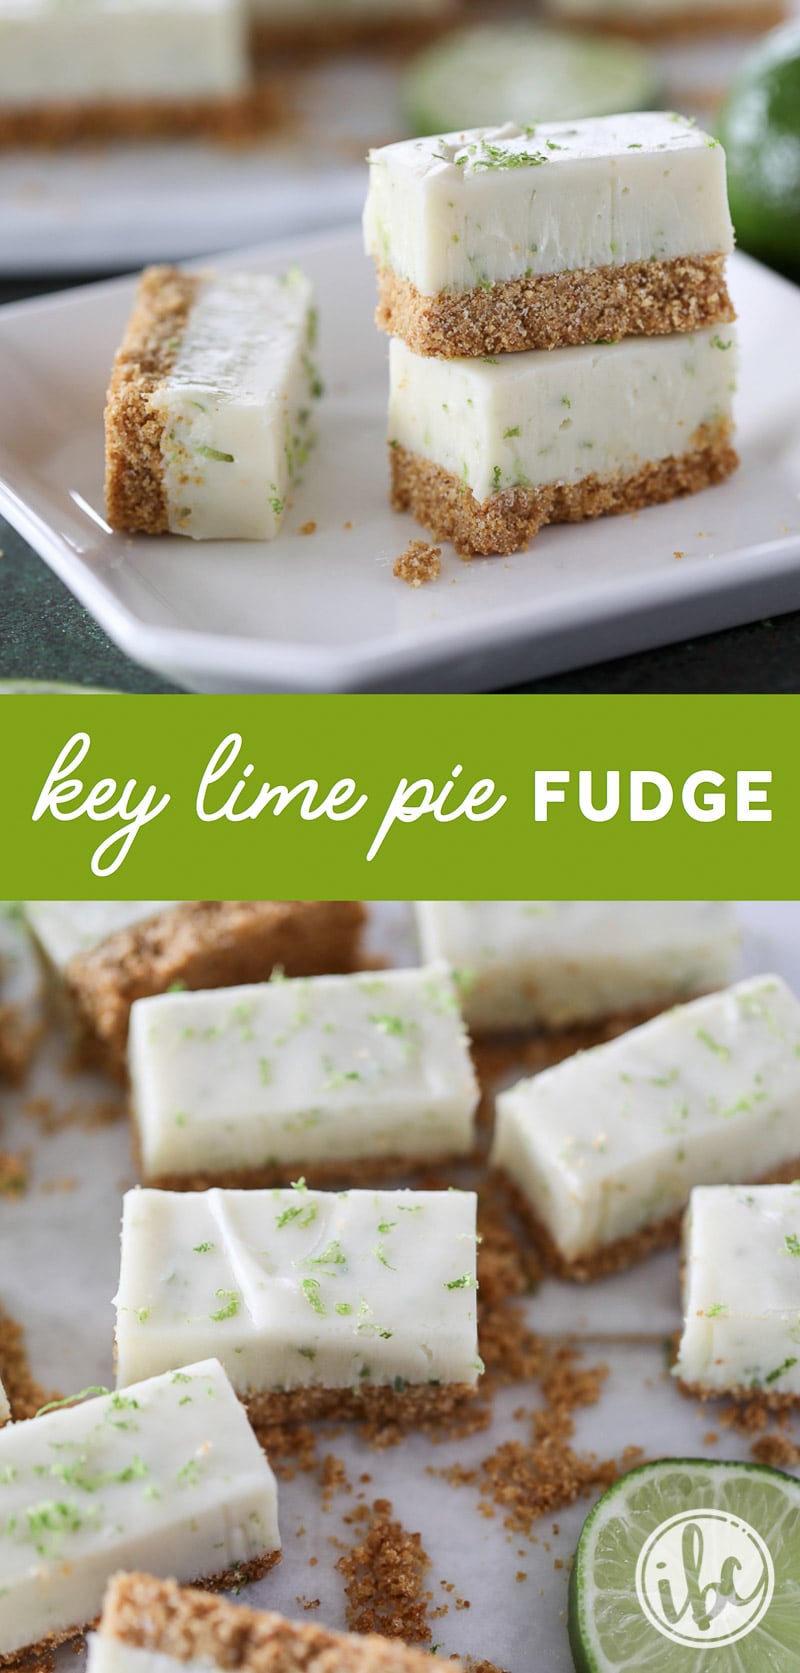 Rich and creamy with a graham cracker crust, this Key Lime Pie Fudge #recipe is a winner! #keylime #pie #lime #fudge